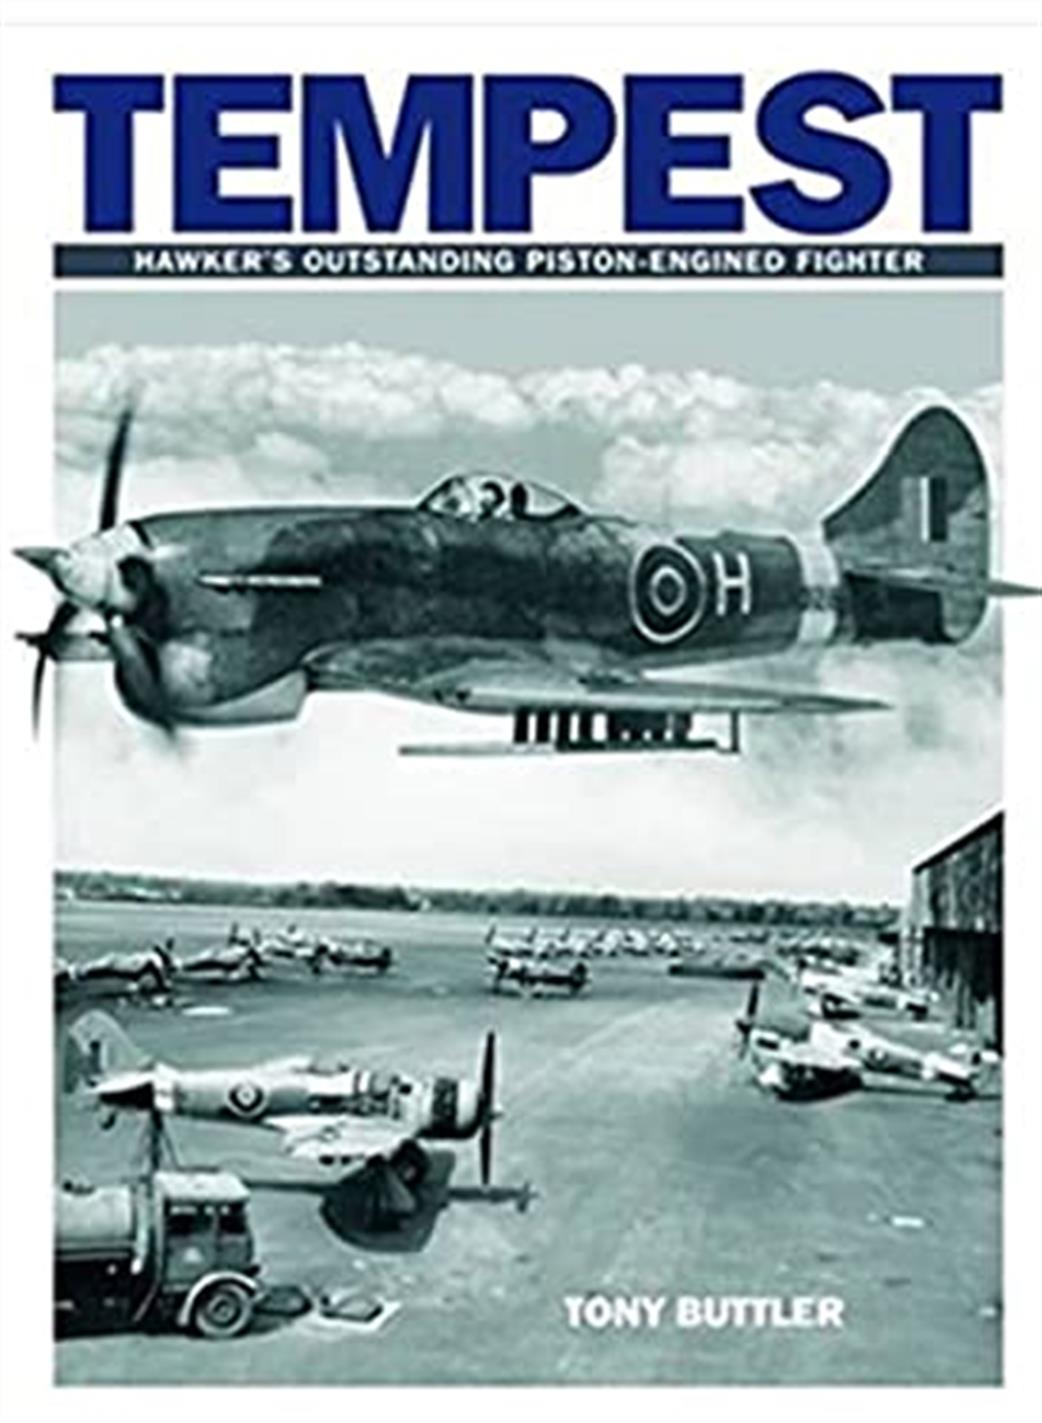 9781905414154 Tempest Hawker's outstanding piston-engined fighter book by Tony Buttler